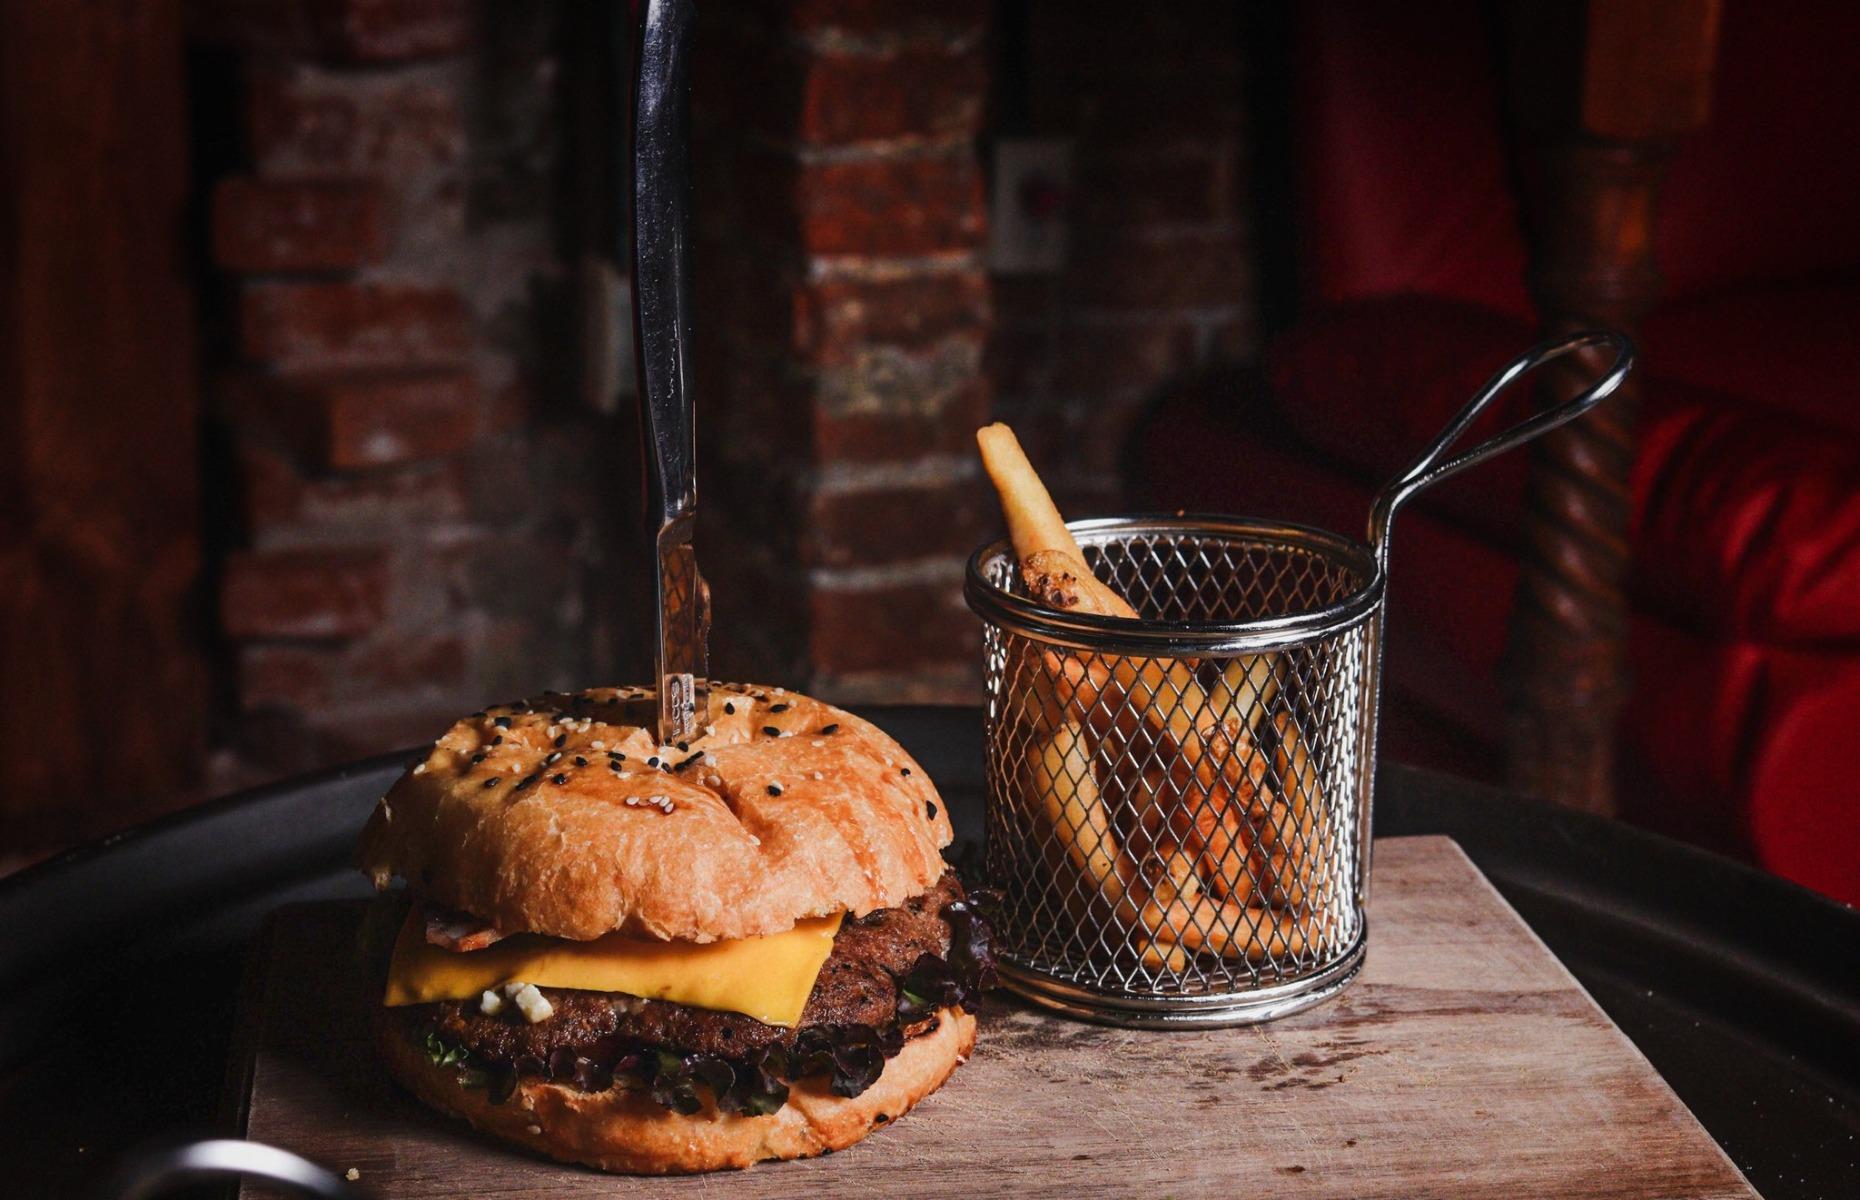 <p>The menu at <a href="https://www.elmesondelos3magos.com.mx/">El Mesón de los 3 Magos</a> in Mexico City is packed with Potter-themed options, from drinks to desserts, as well as main meals. The (thankfully owl free) Hedwig Burger brings Potter fans a generous helping of grilled bison meat nestled in a fluffy brioche bun and topped with bacon, lettuce, tomato, Cheddar cheese and pickles. </p>